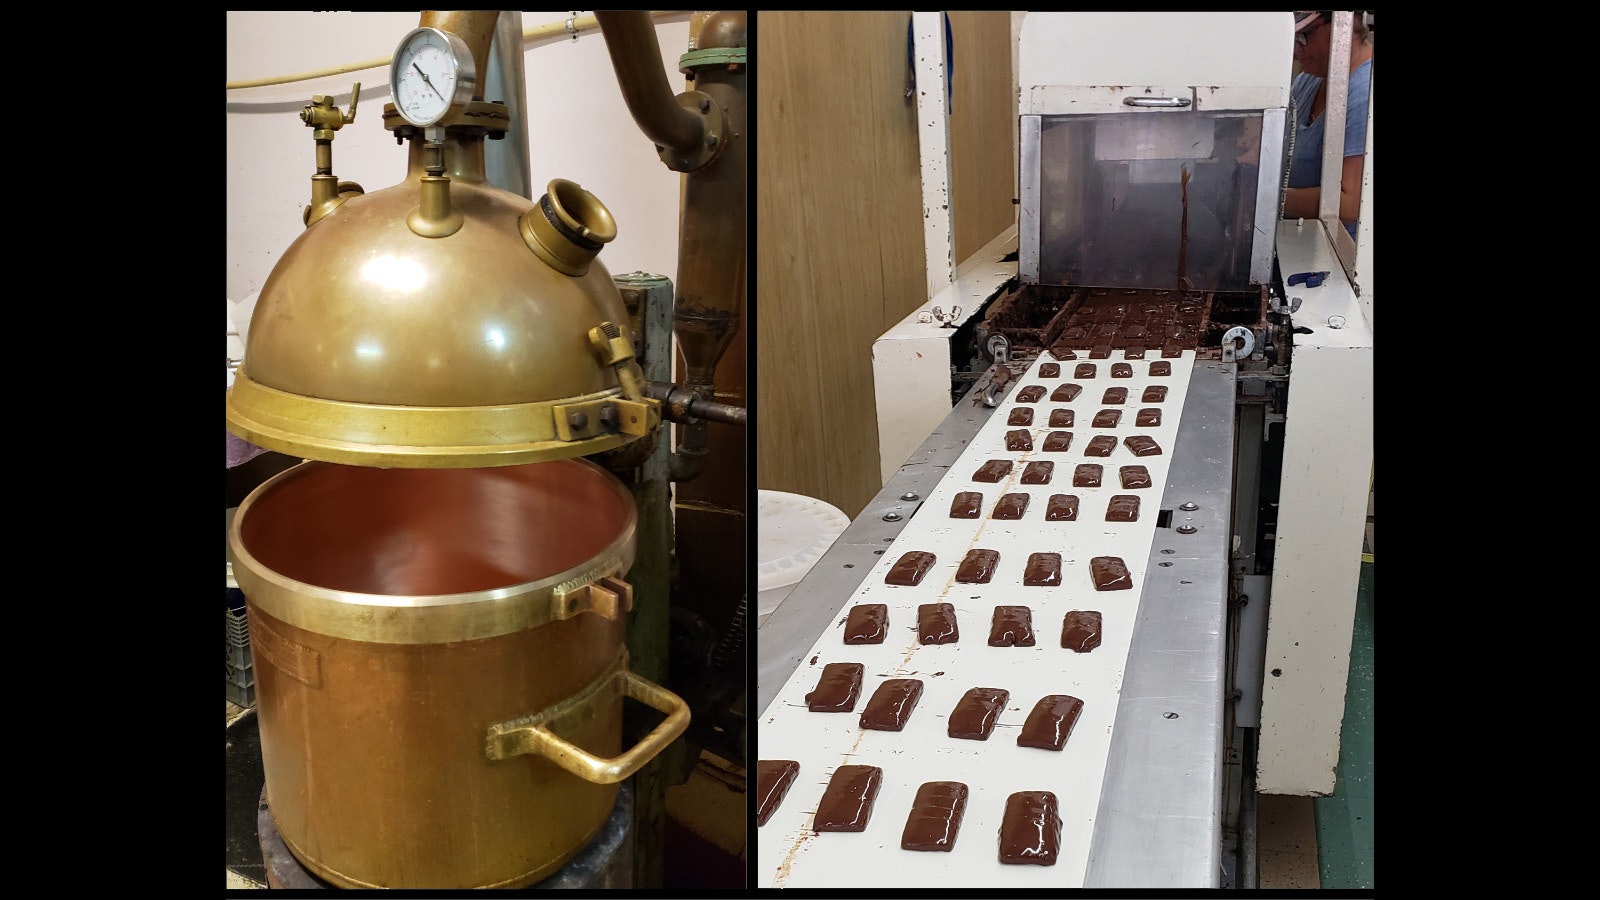 Copper cookers hep distribute heat more evenly in making Queen Bee's honey candies. Some are enrobed in chocolate.